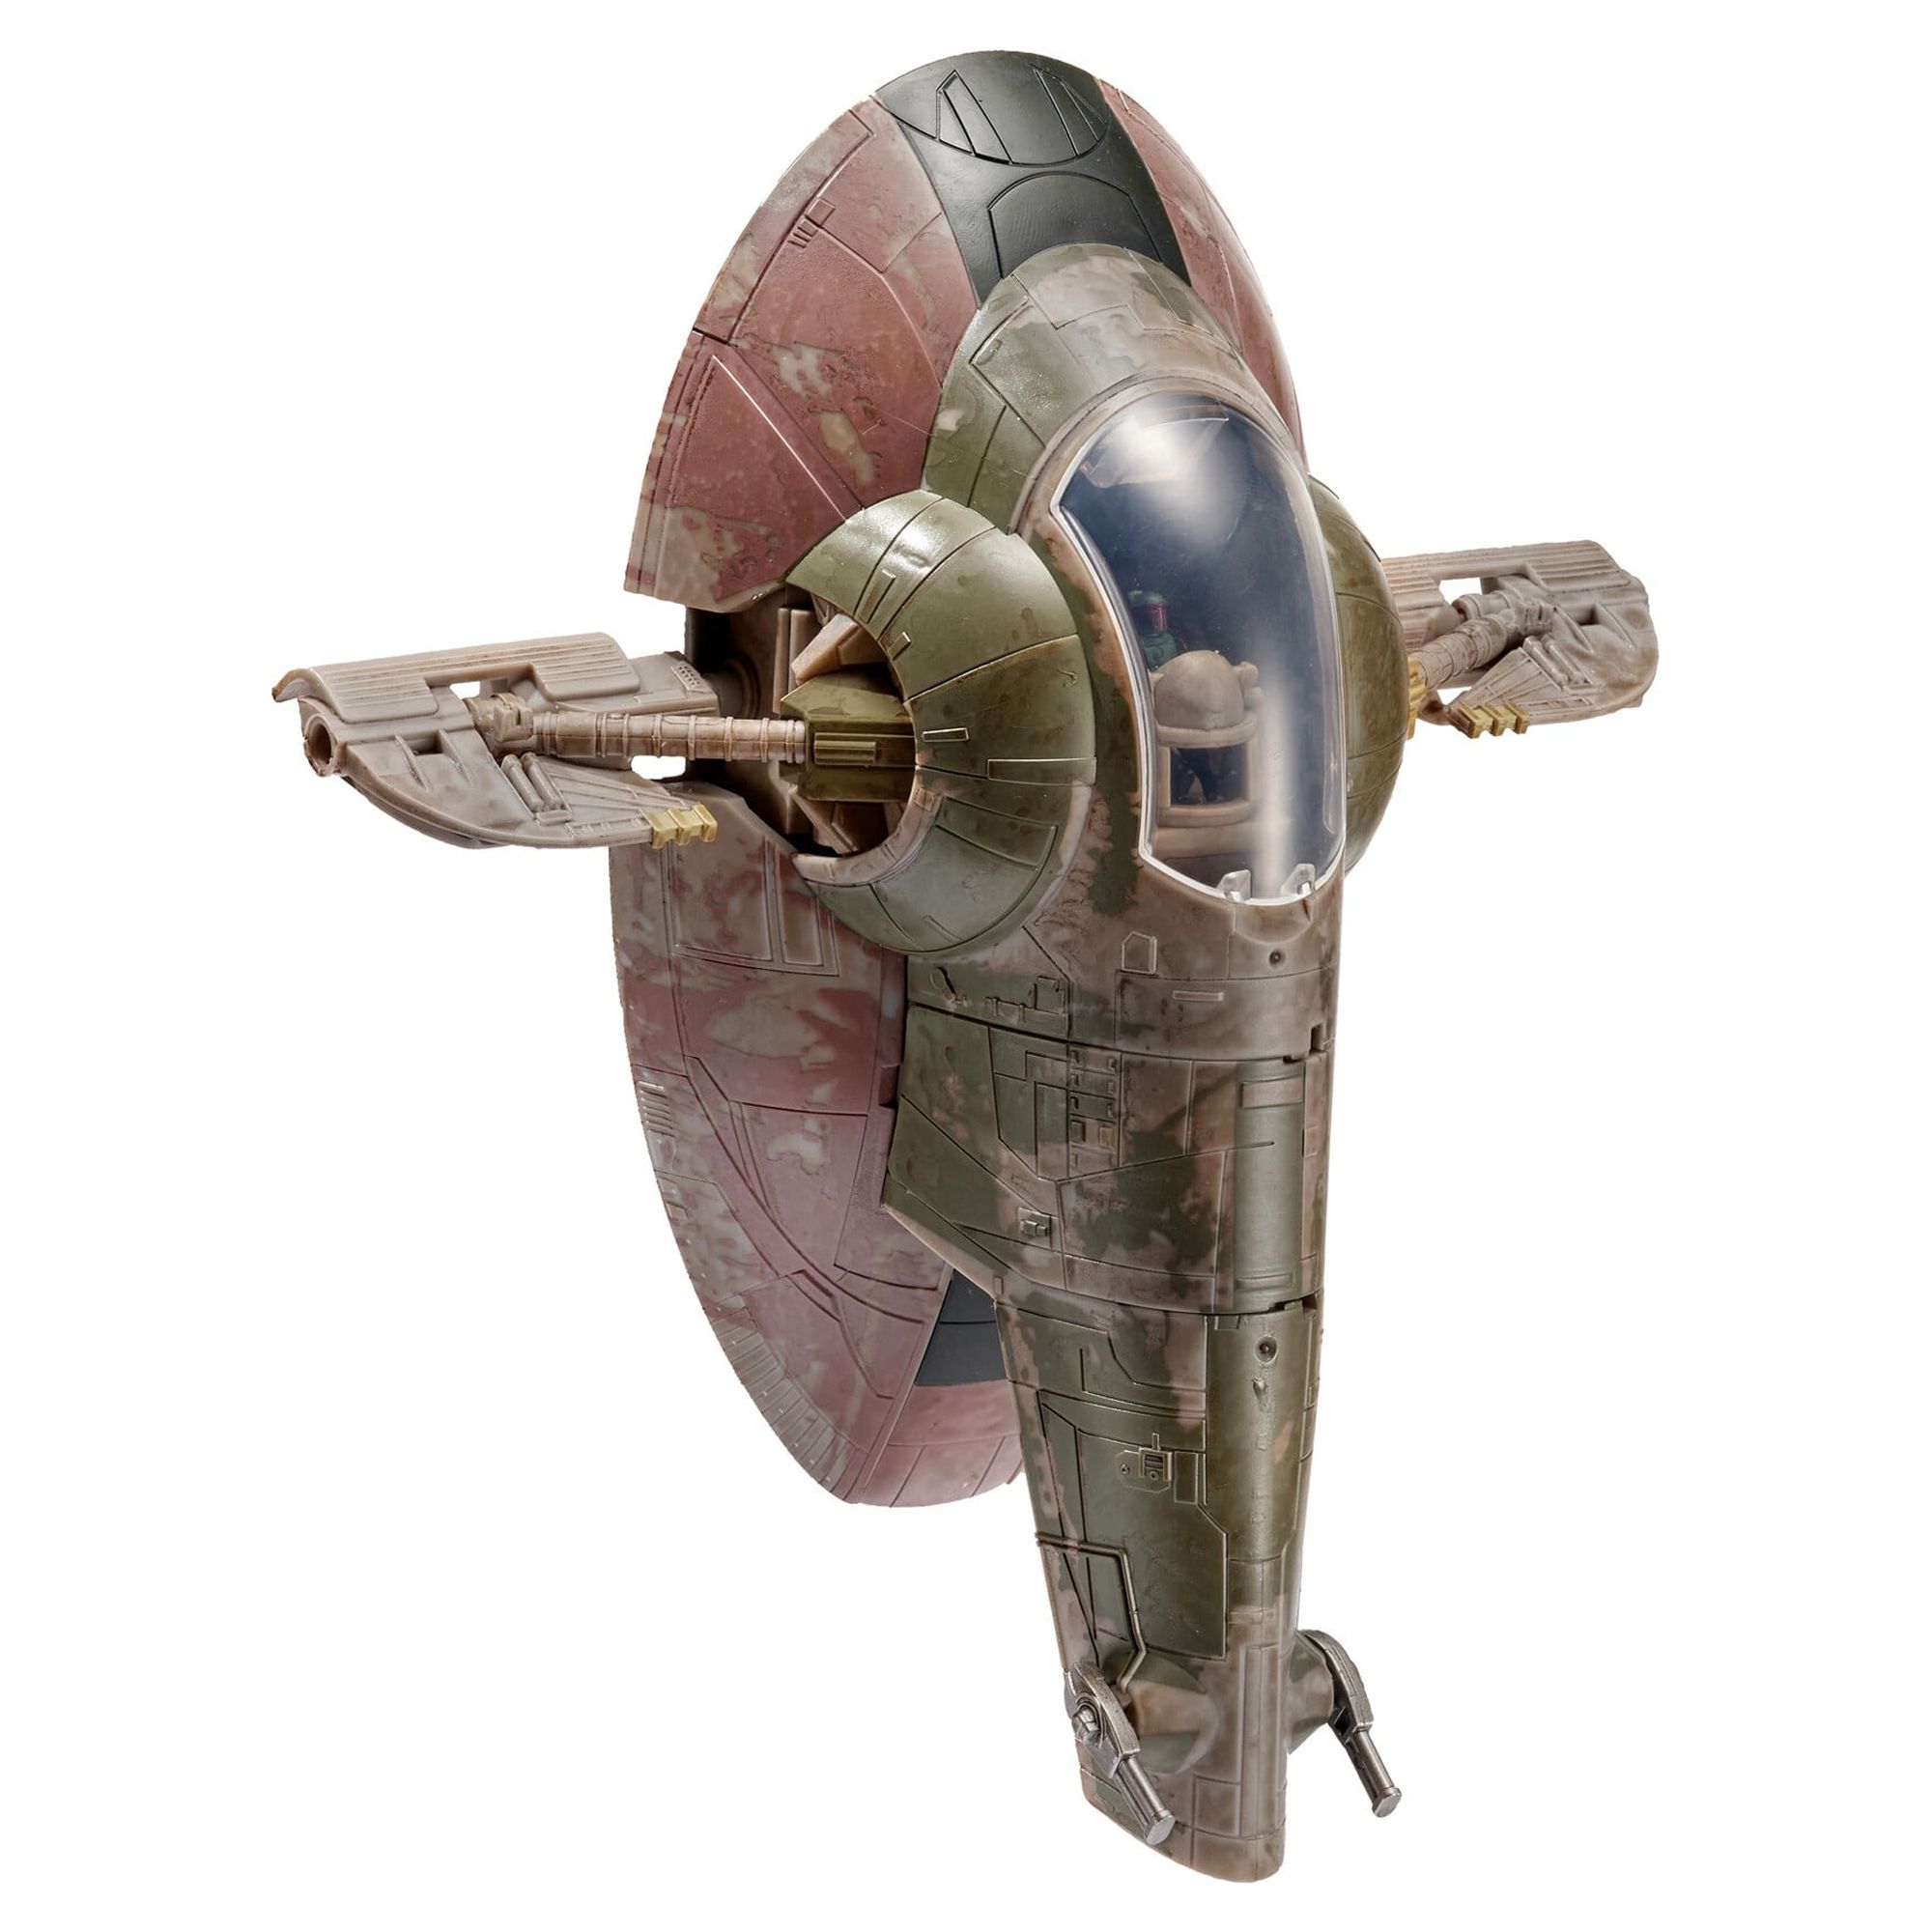 Star Wars Micro Galaxy Squadron Boba Fett’s Starship - 7-Inch Starship Class Vehicle with 1-Inch Boba Fett and Fennec Shand Micro Figure Accessories - image 3 of 6